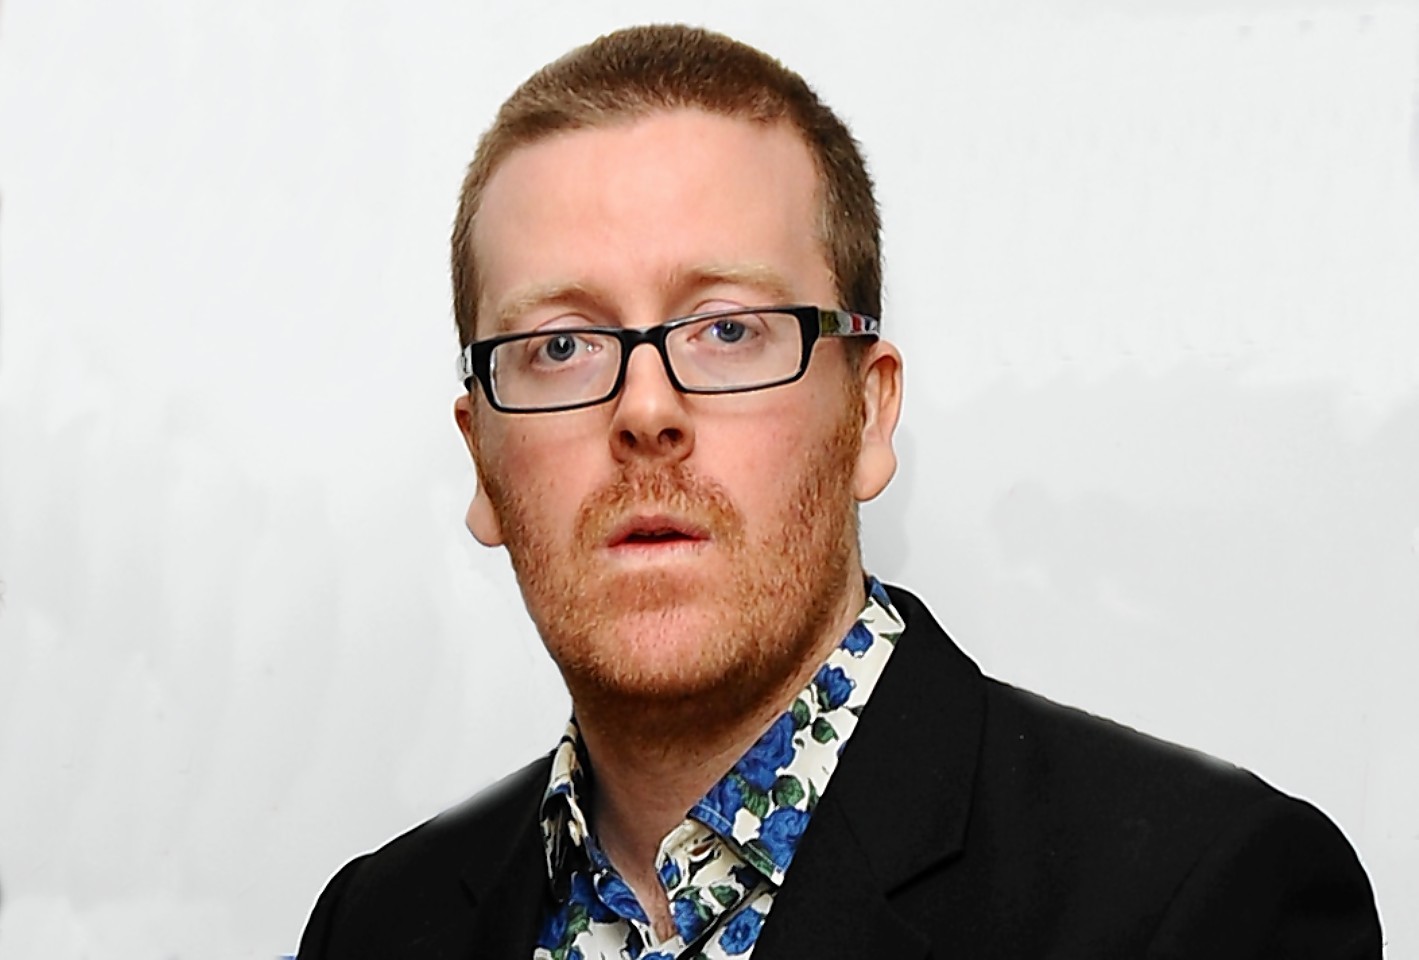 Frankie Boyle has made a generous donation to help those hit by the food bank break in